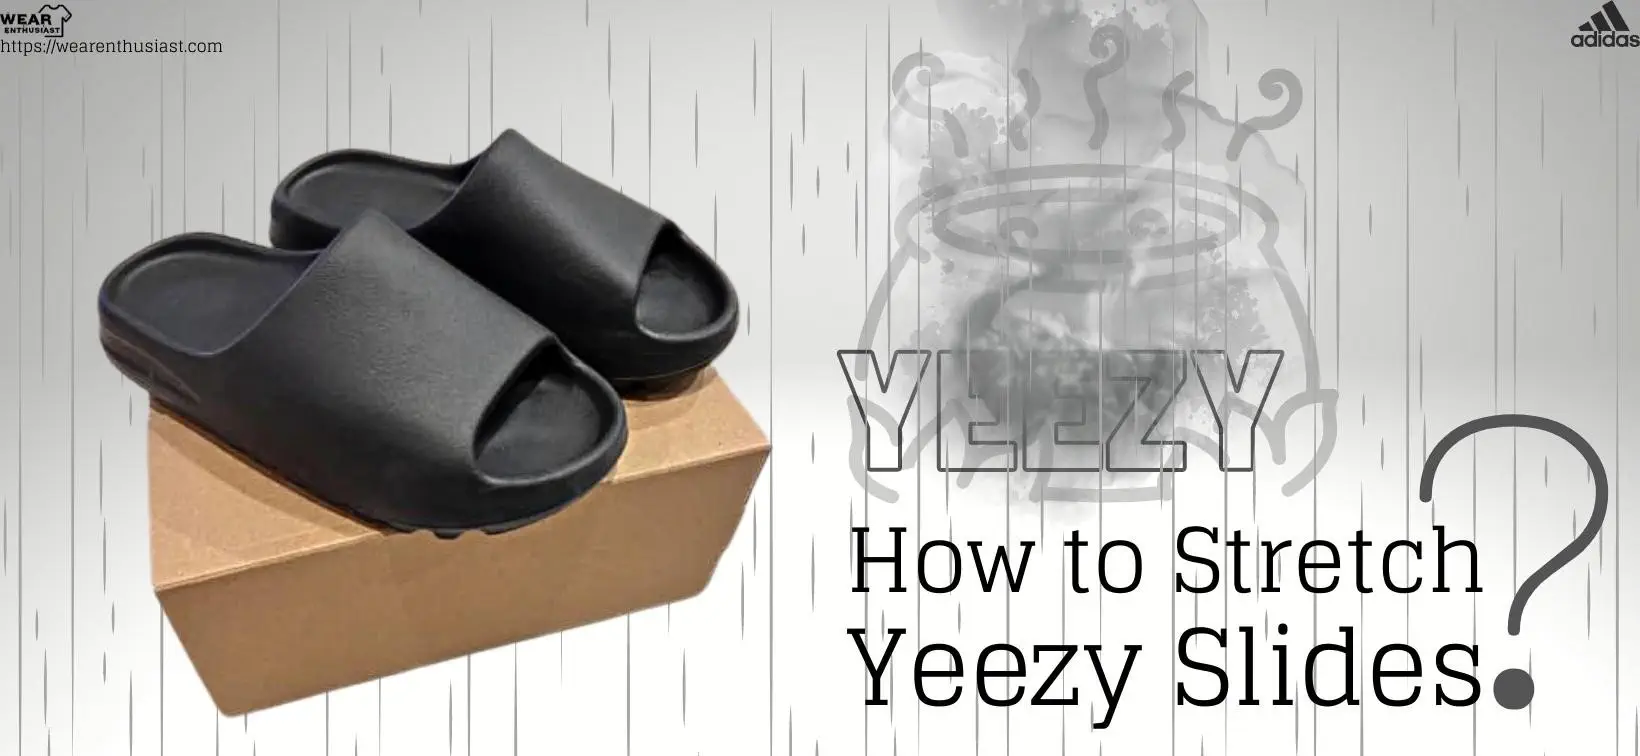 How to Stretch Yeezy Slides?